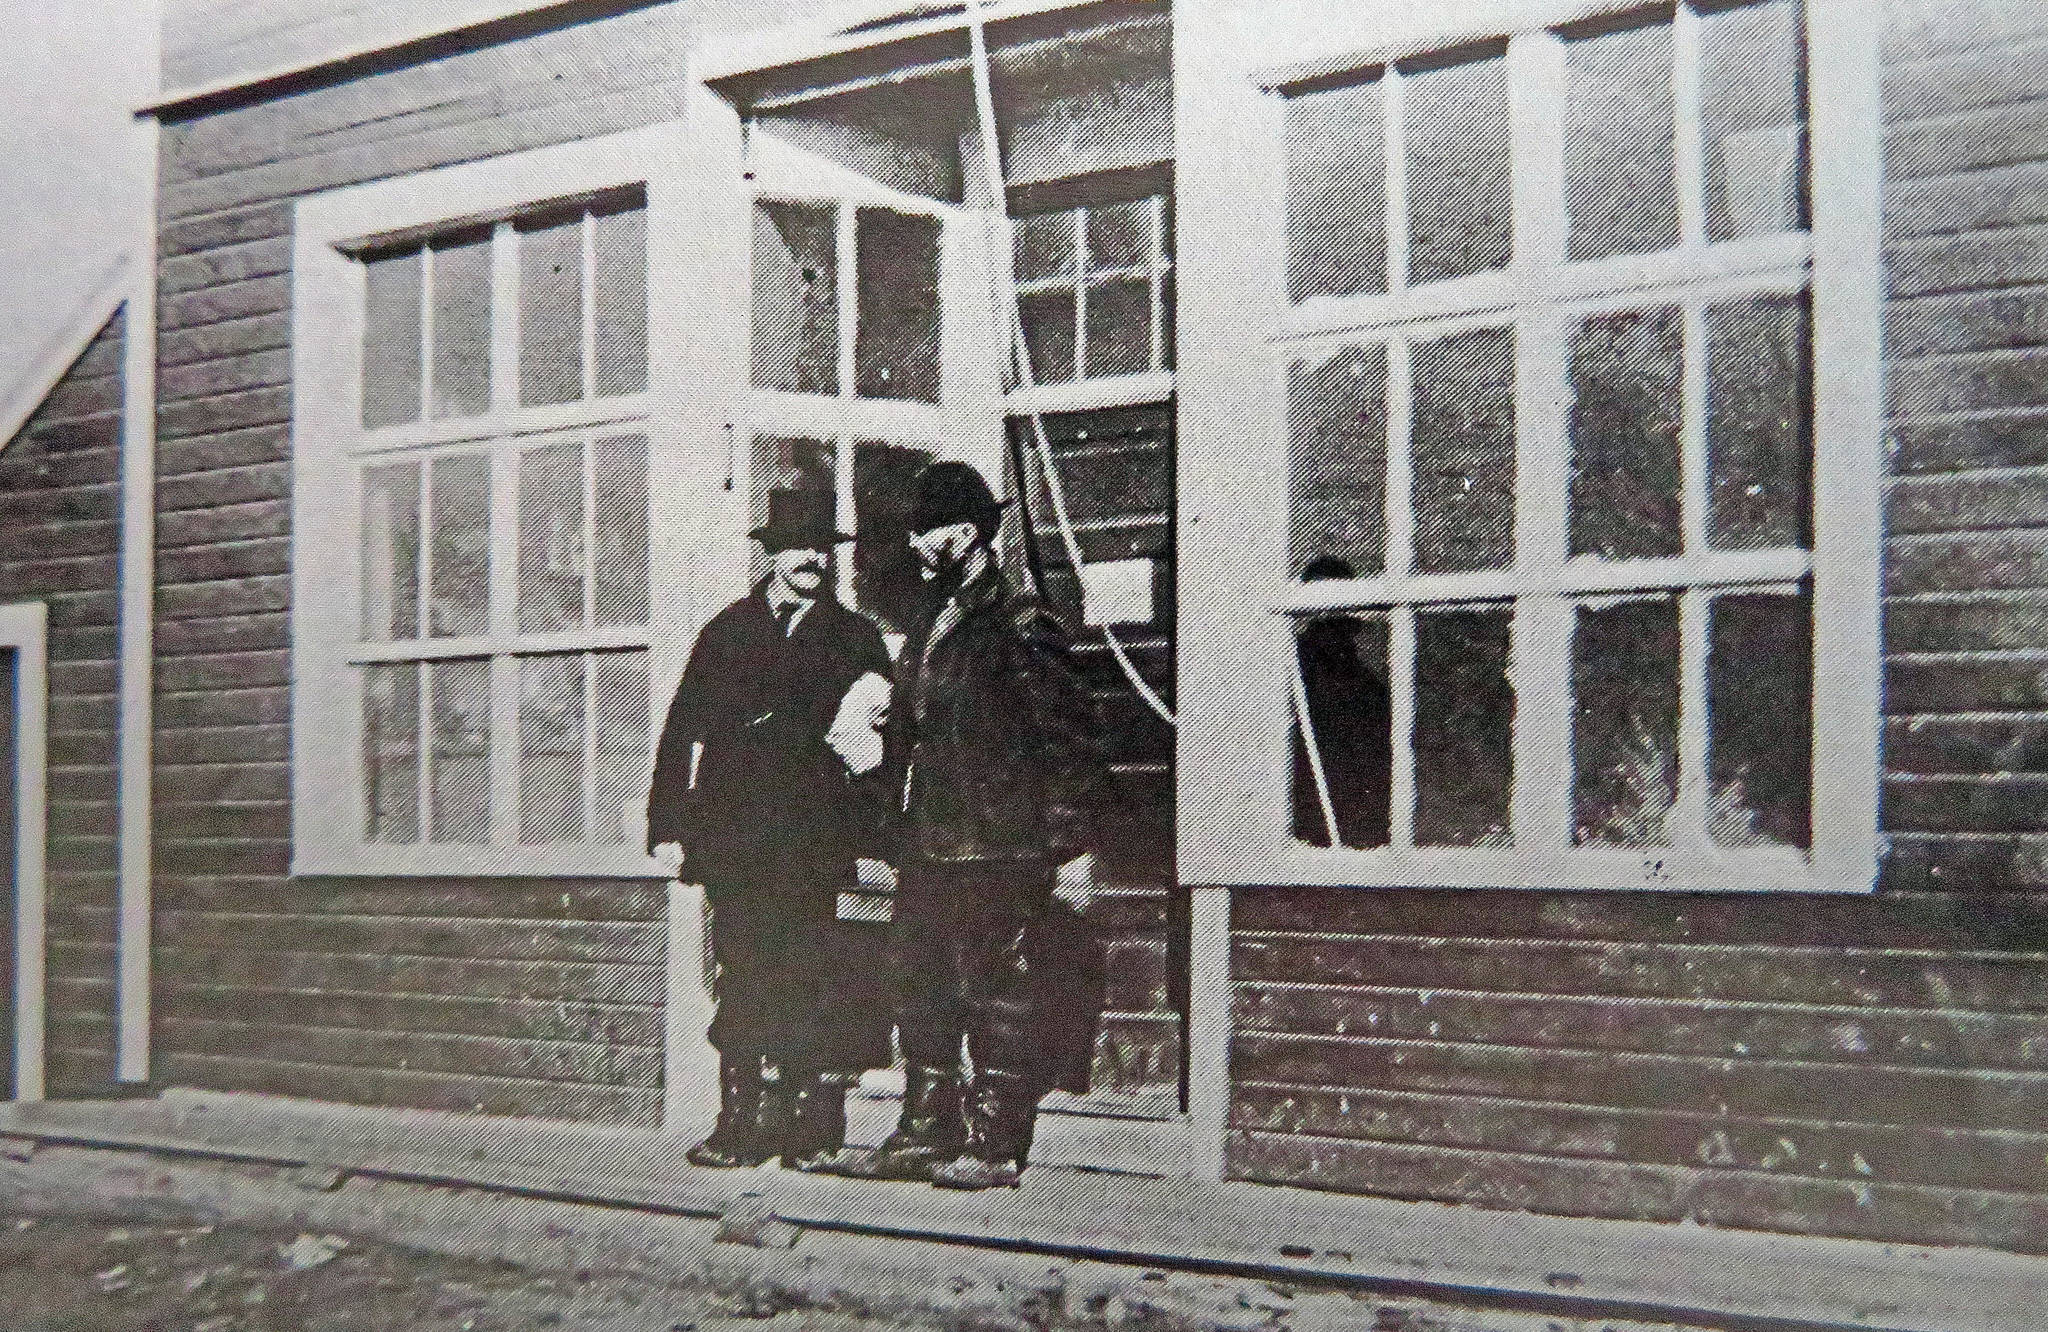 Photo from “Once Upon the Kenai” 
William N. Dawson chats with Captain Rose, of the S.S. Tyonic, in front of Dawson’s Kenai store in 1915.